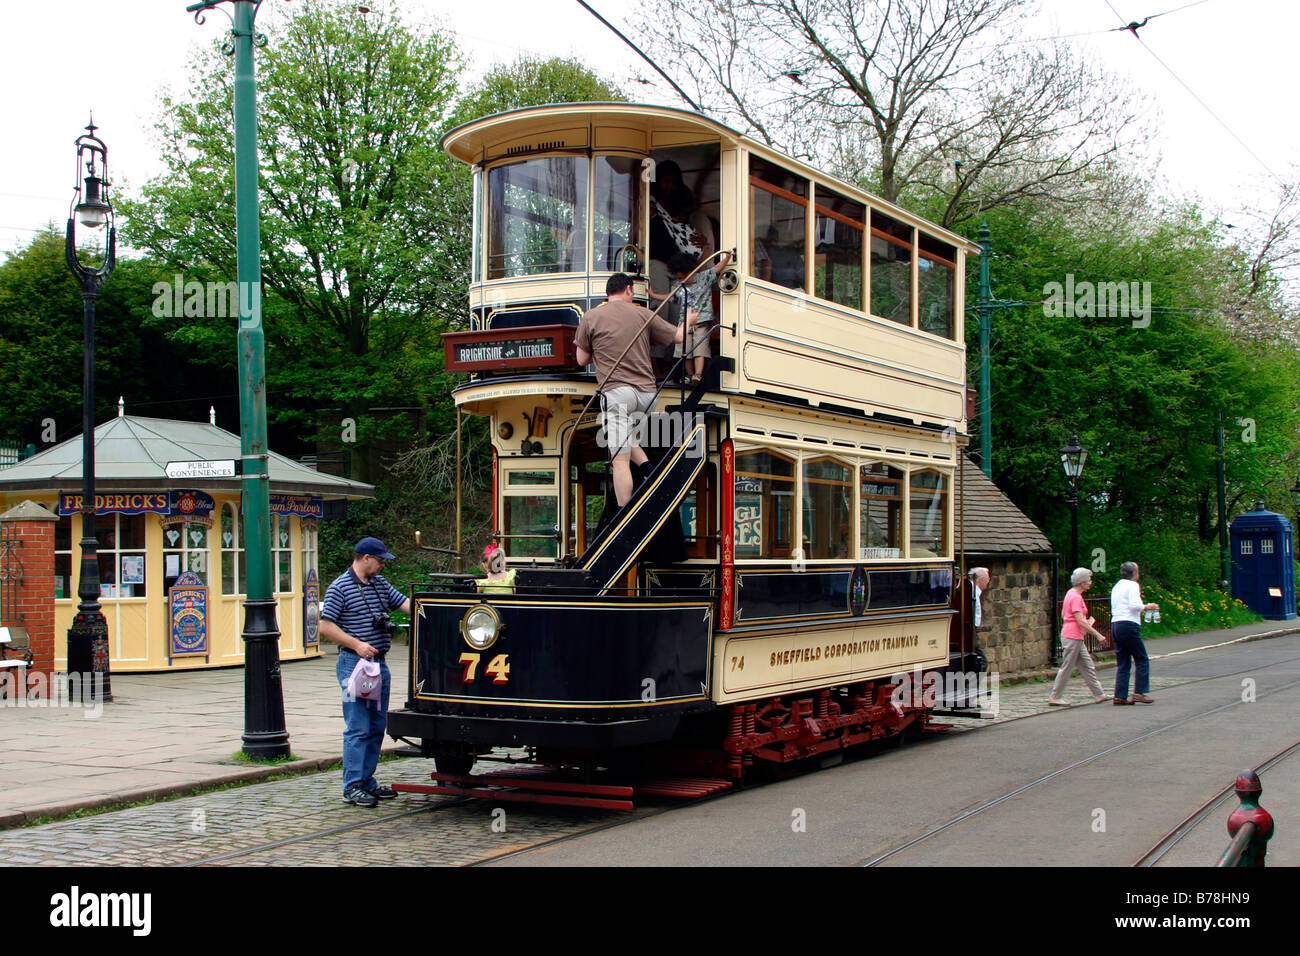 74 tramway sheffield 1900 Banque D'Images